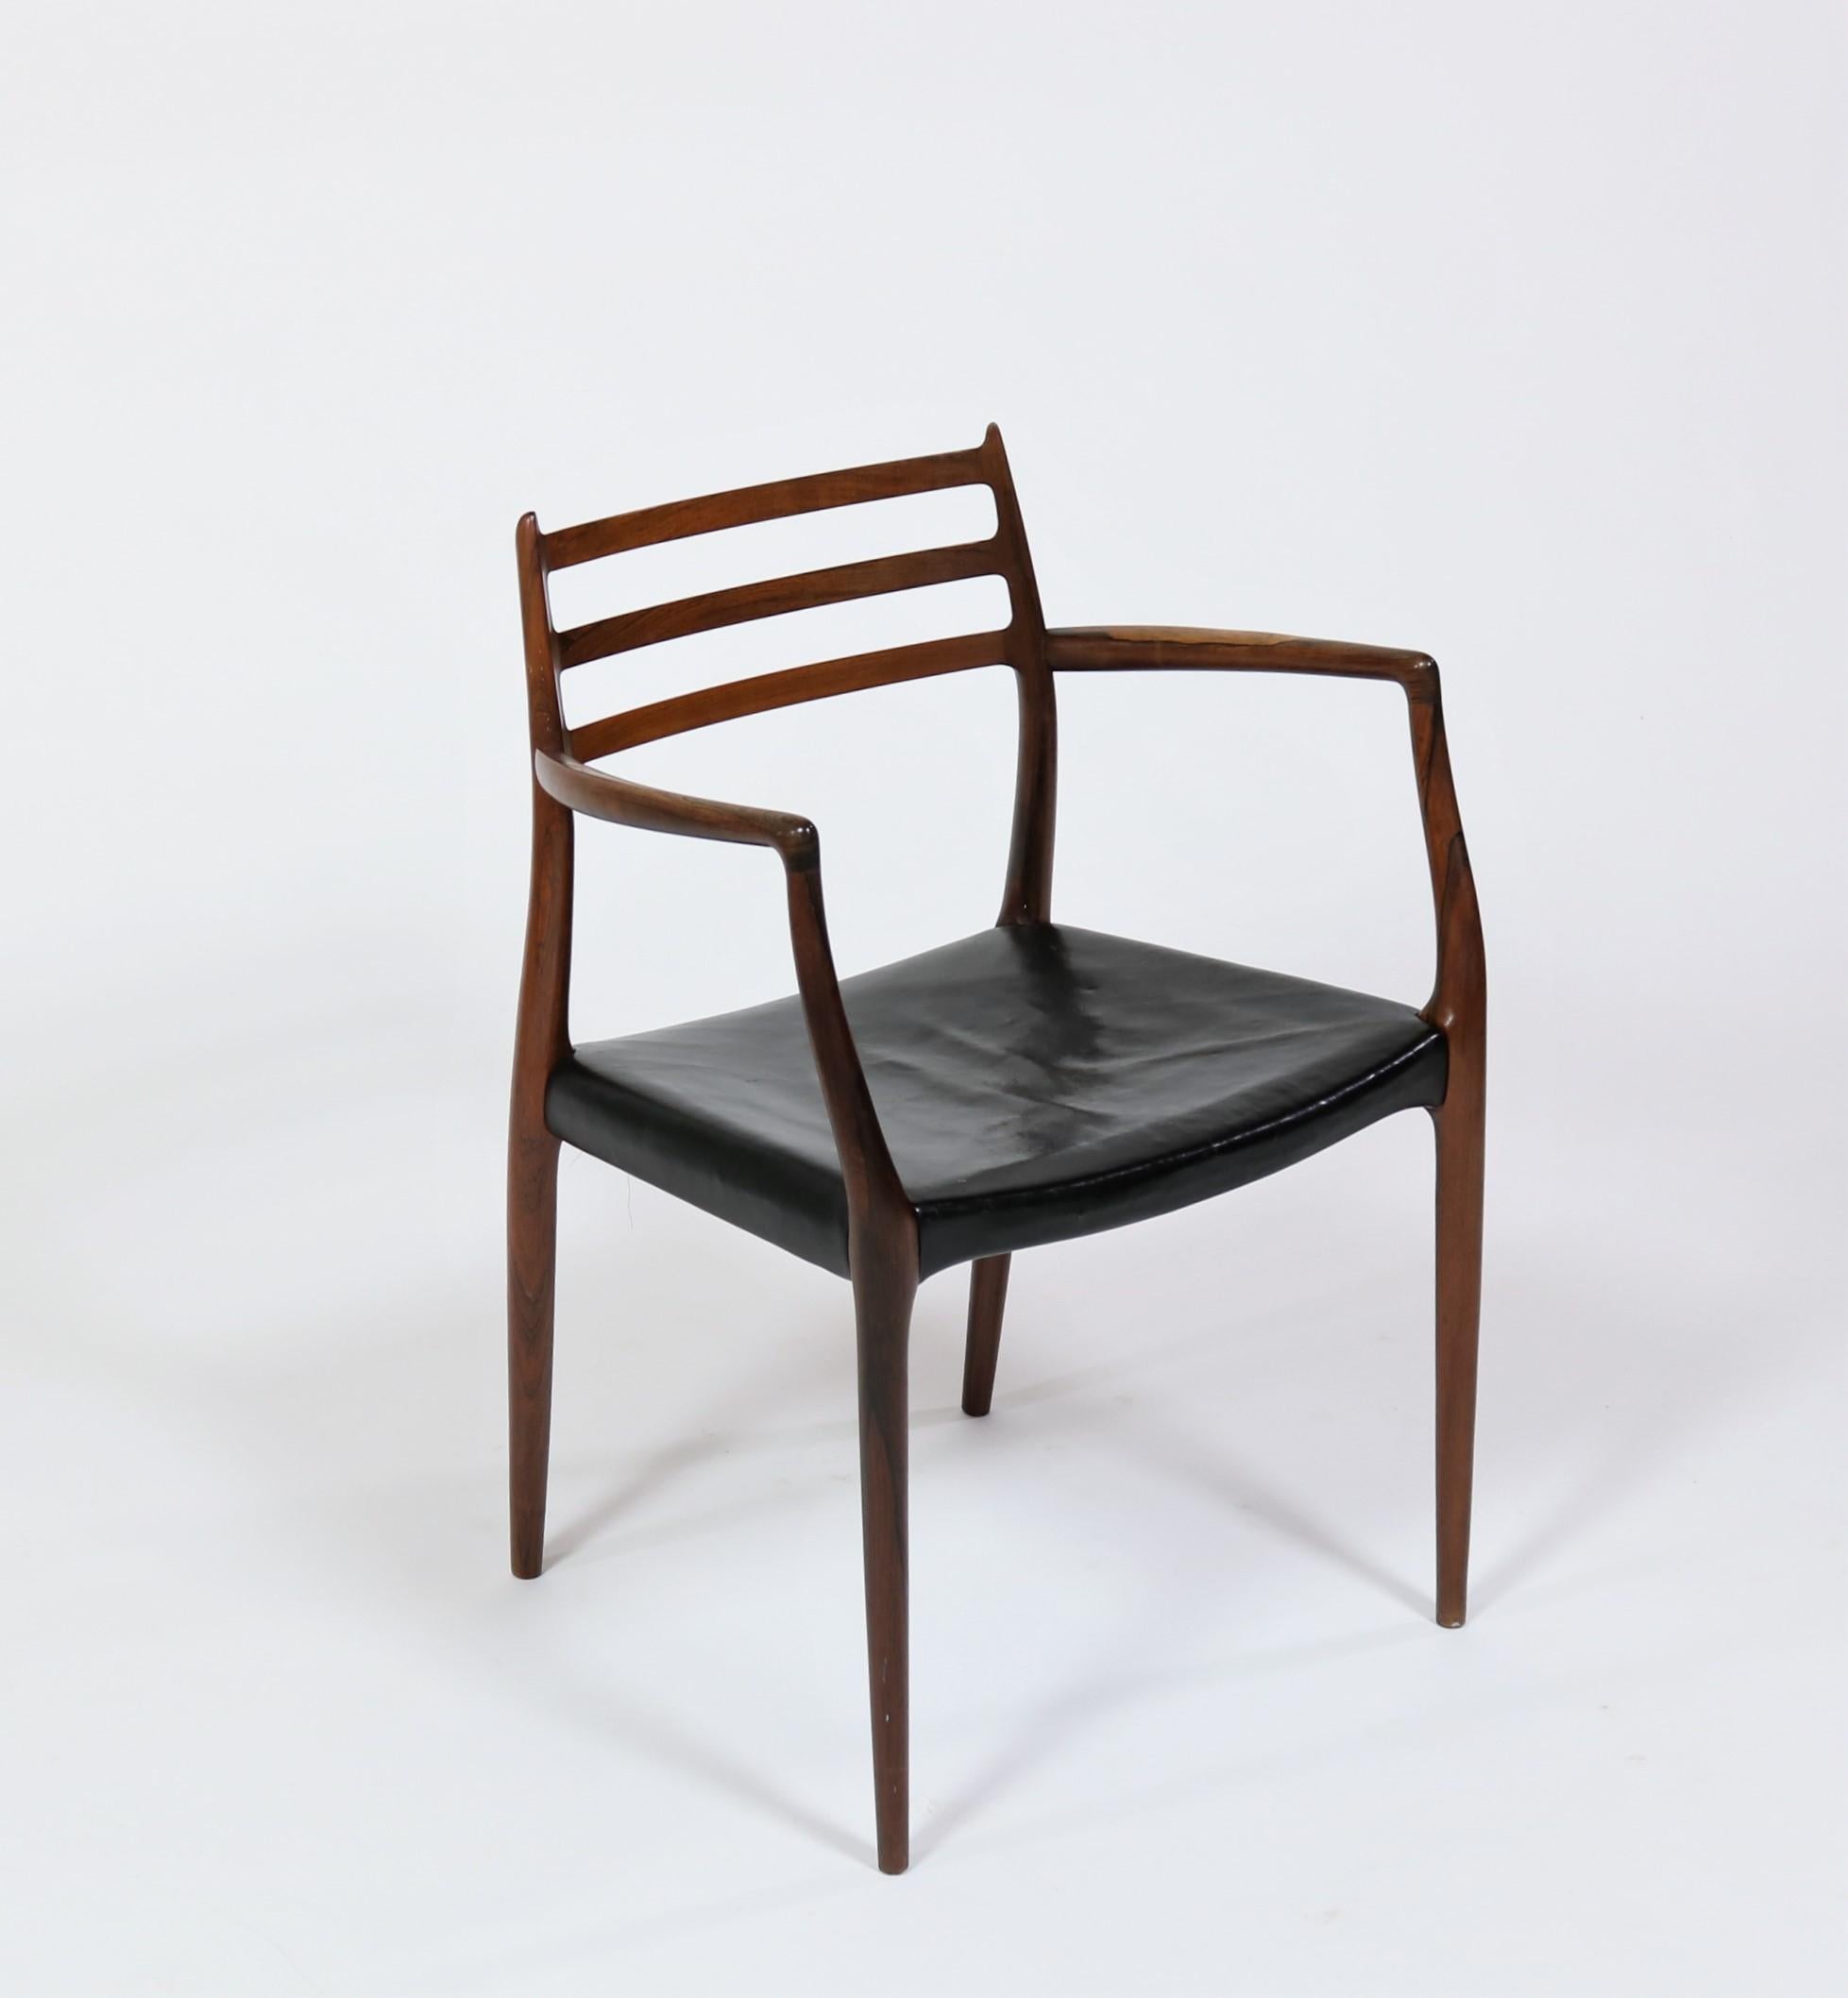 Stunning craftmanship meets brilliant design in this Brazillian rosewood armchair designed by Niels Moller for J.L. Moller Mobelfabrik, Denmark, 1962. All original condition with beautiful wear and patina to wood and leather. Iconic and amazing